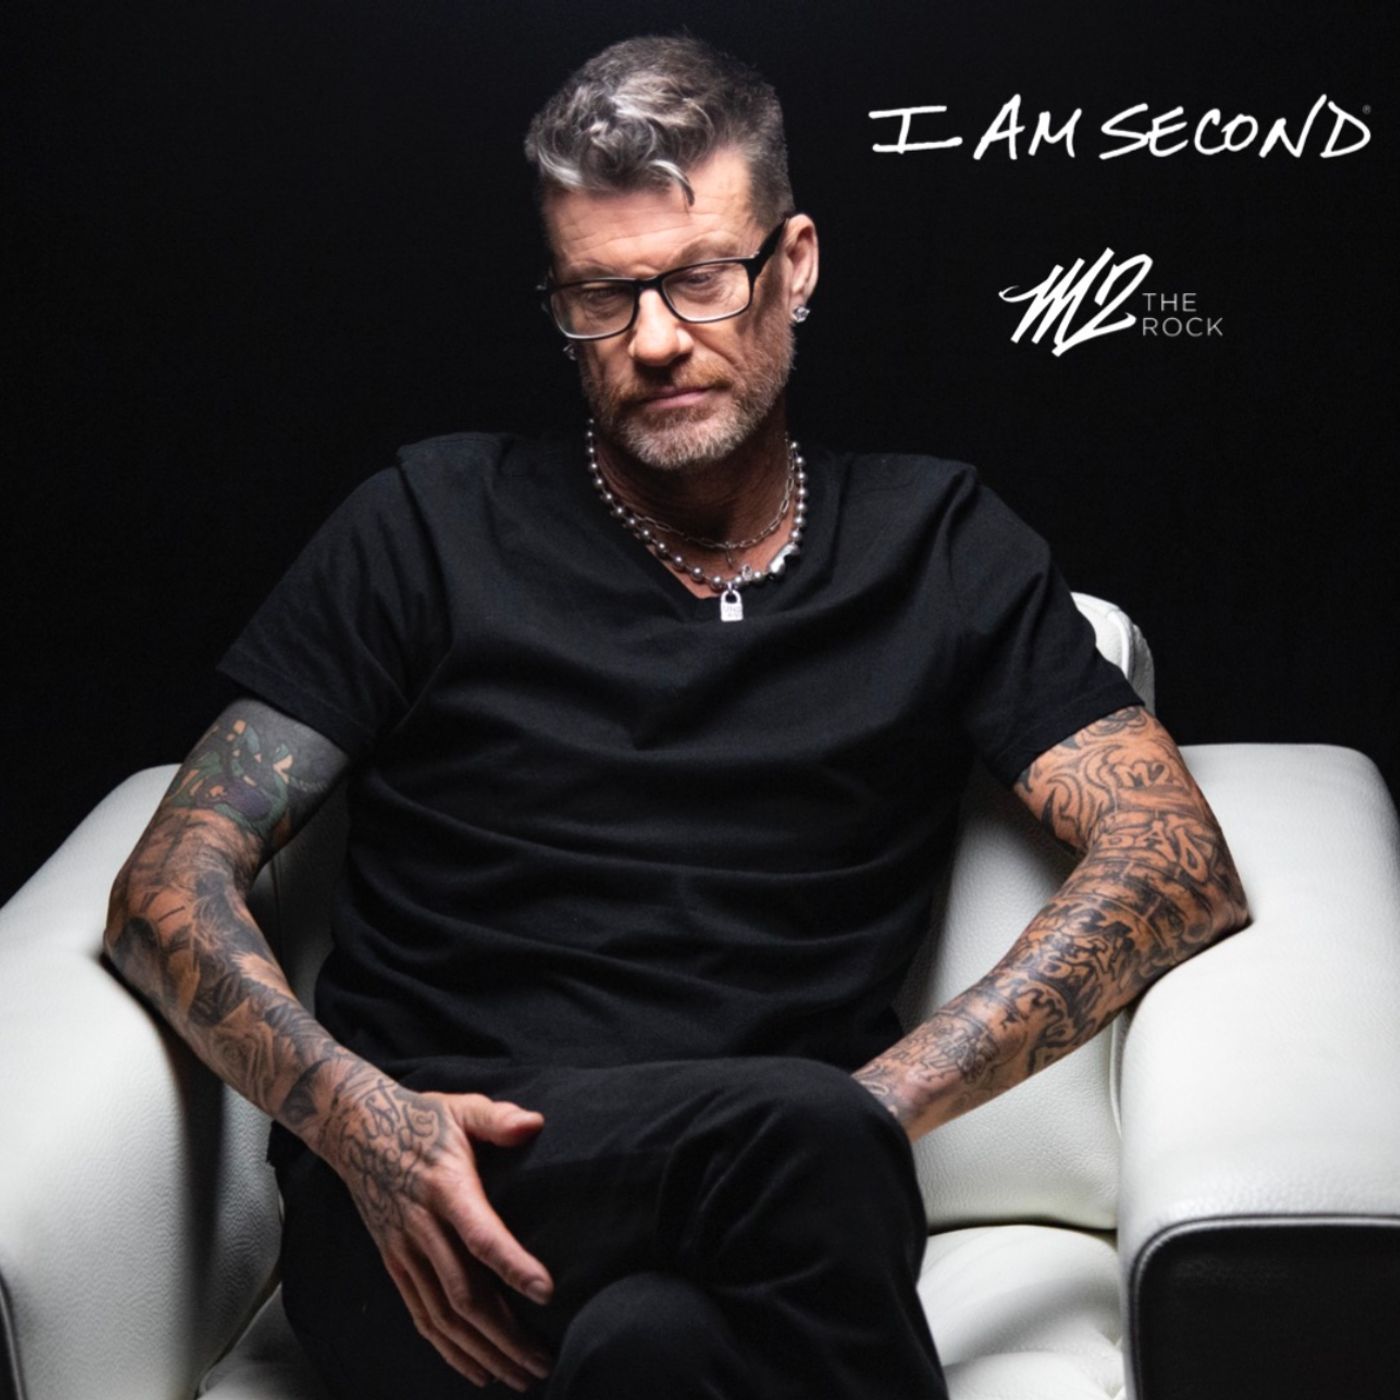 I AM SECOND DAY - MICHAEL MOLTHAN